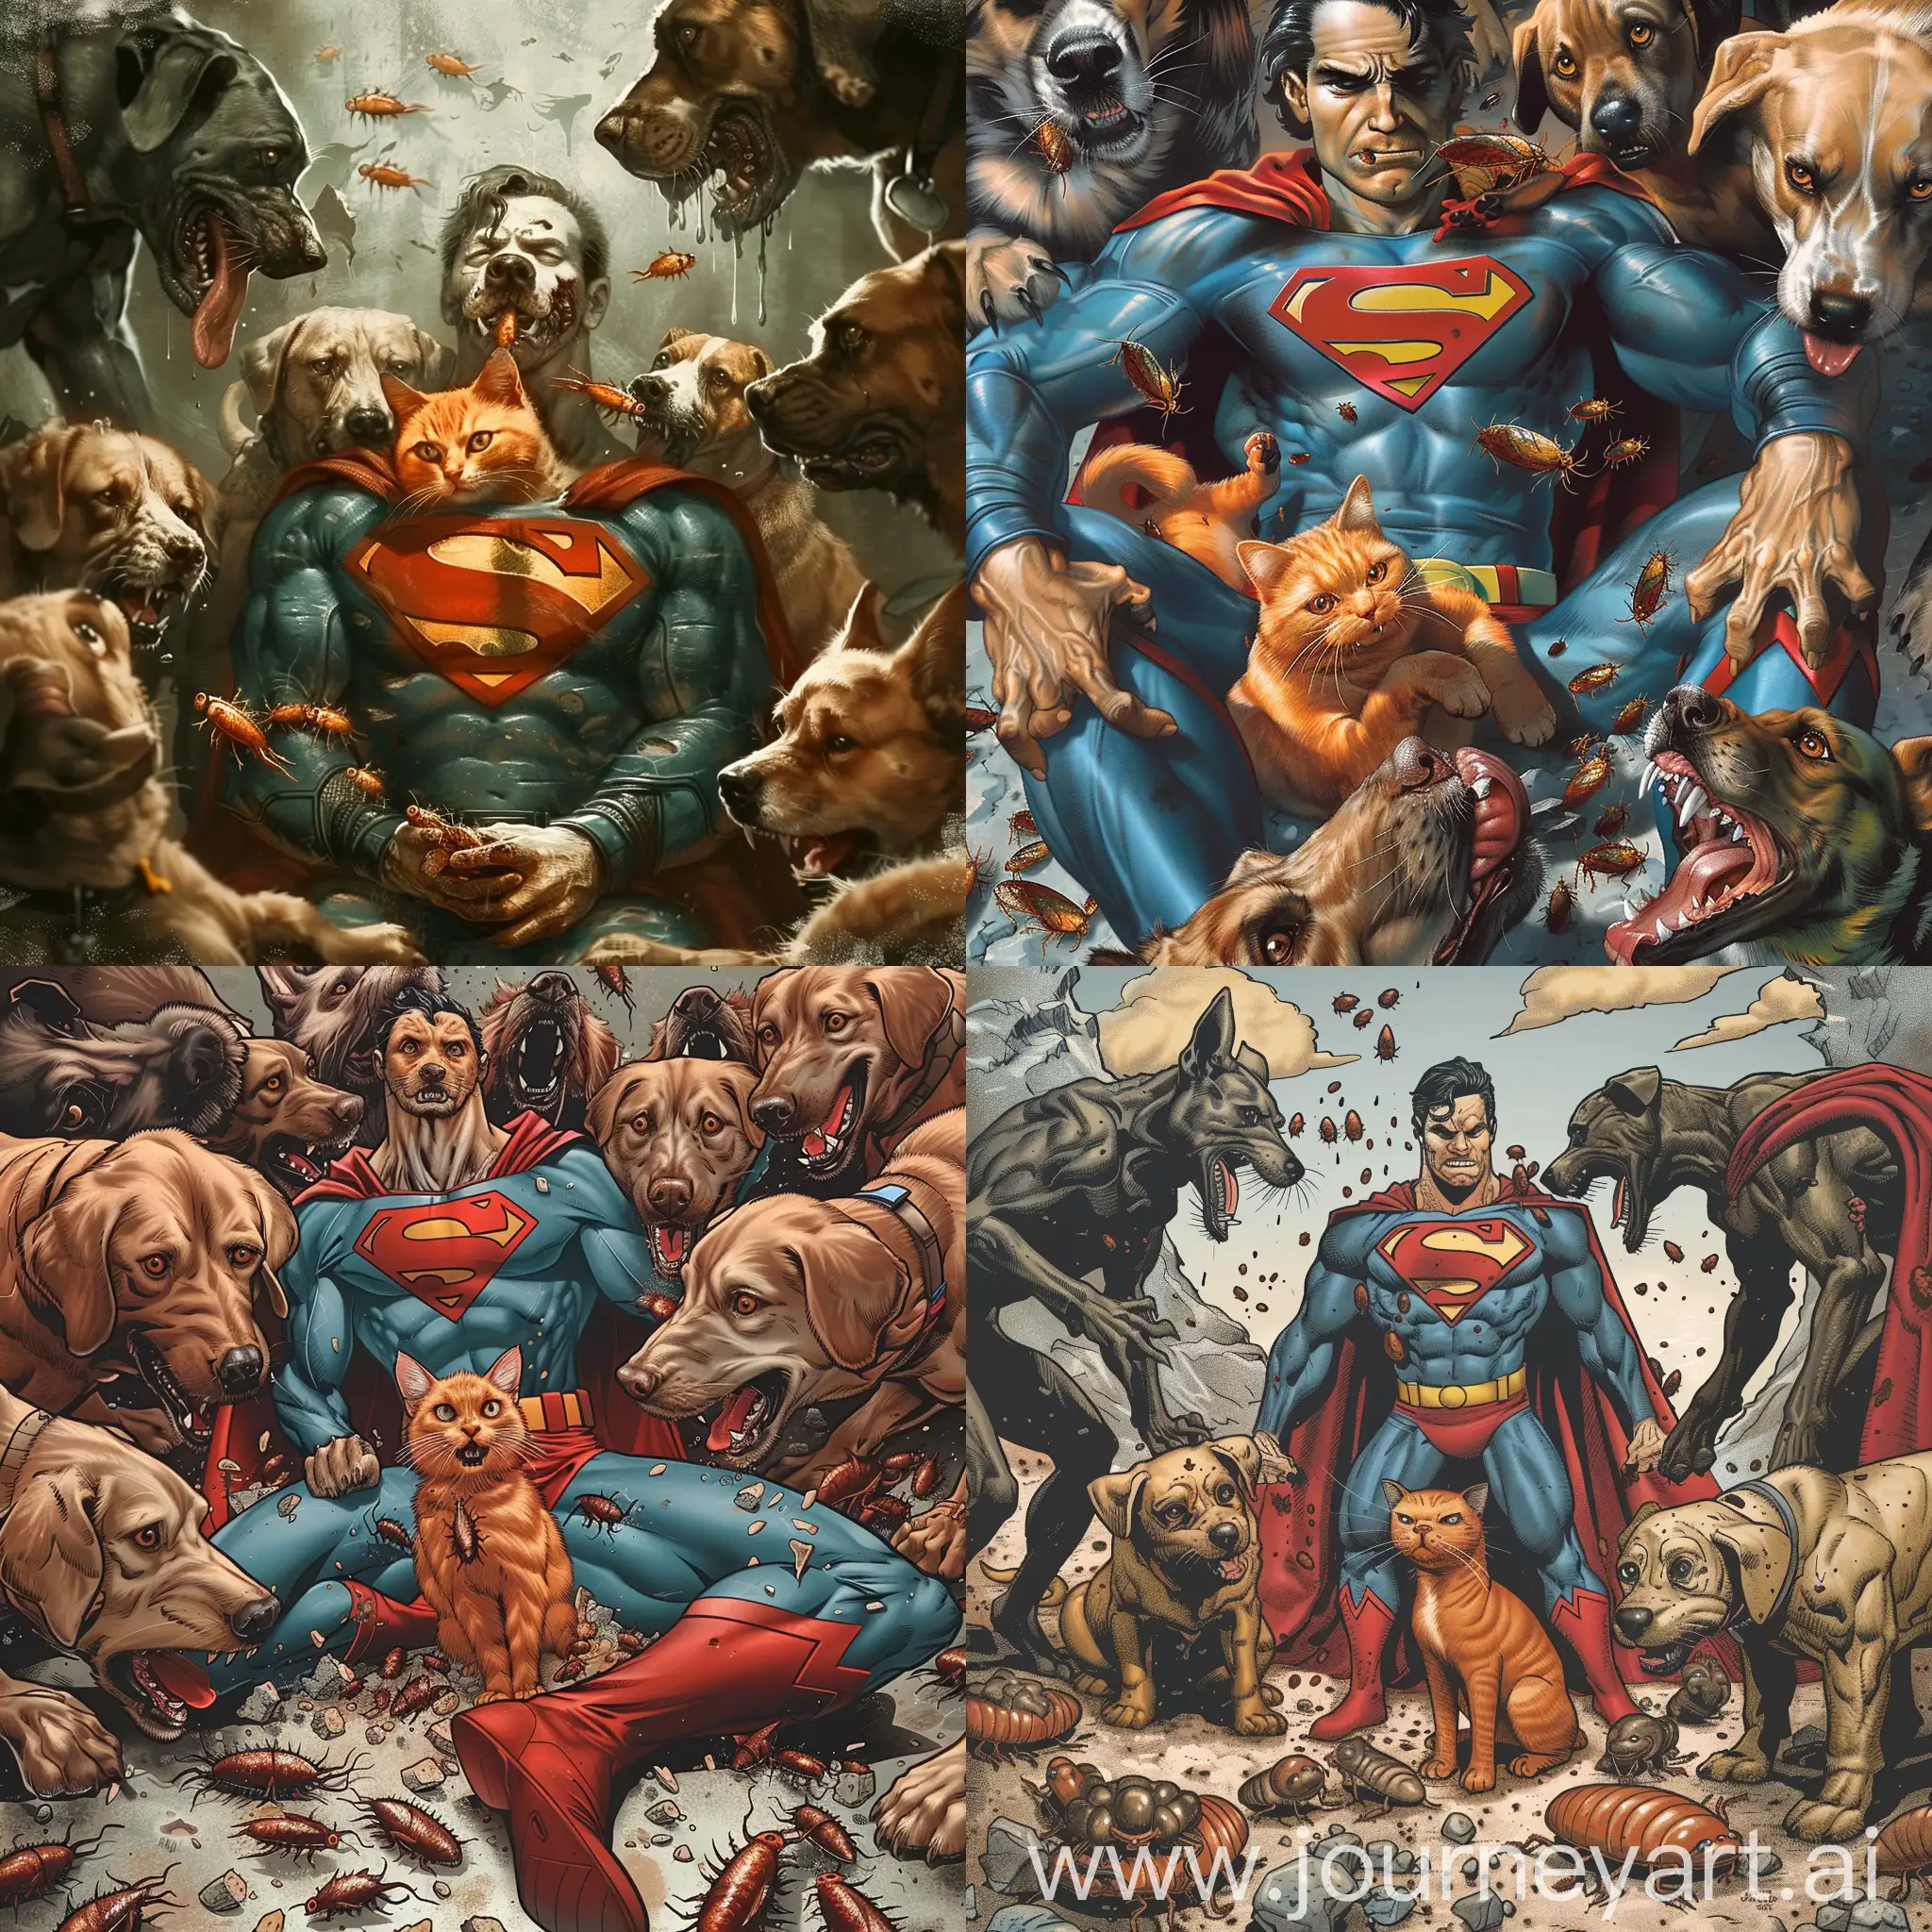 Brave-Orange-Cat-Defends-Against-Hungry-Dogs-Amid-Supermans-Unusual-Meal